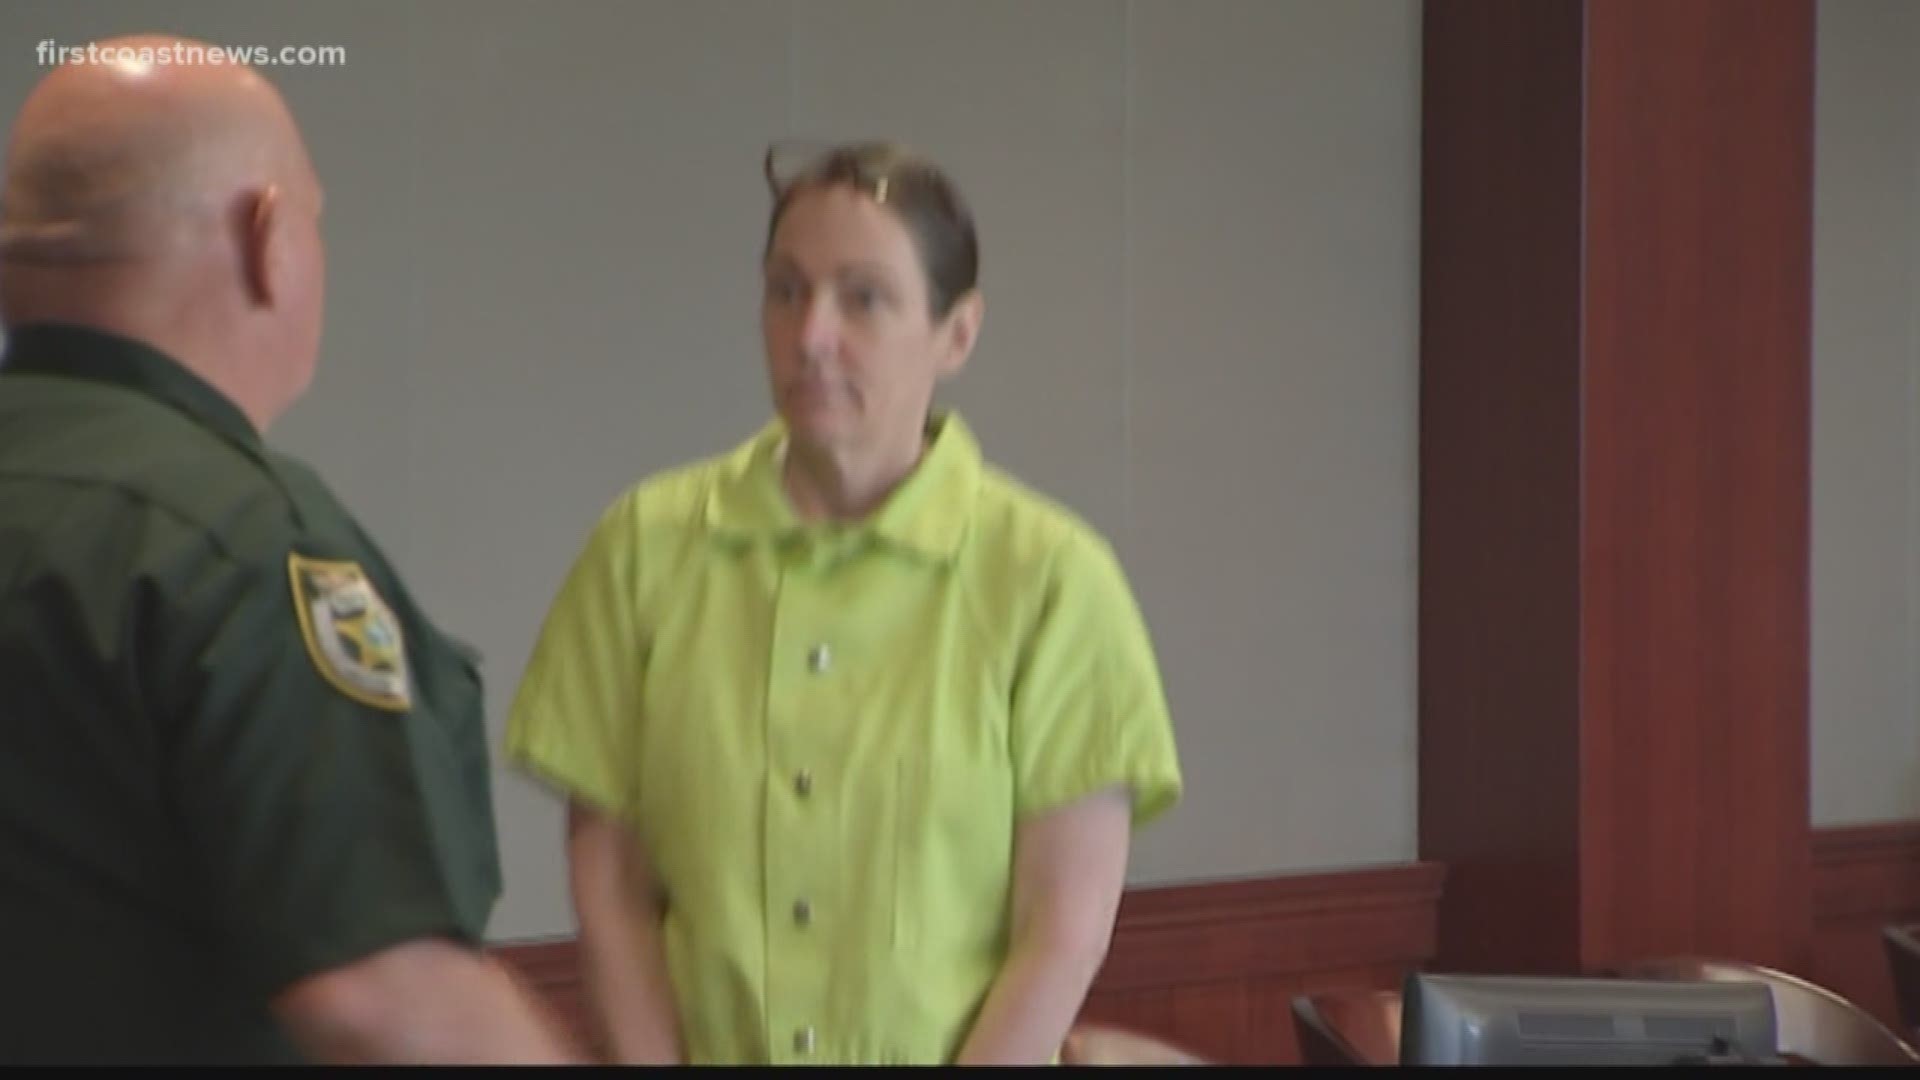 Kimberly Kessler declared competent to face court proceedings for the murder of Joleen Cummings, according to state psychologists who evaluated her.